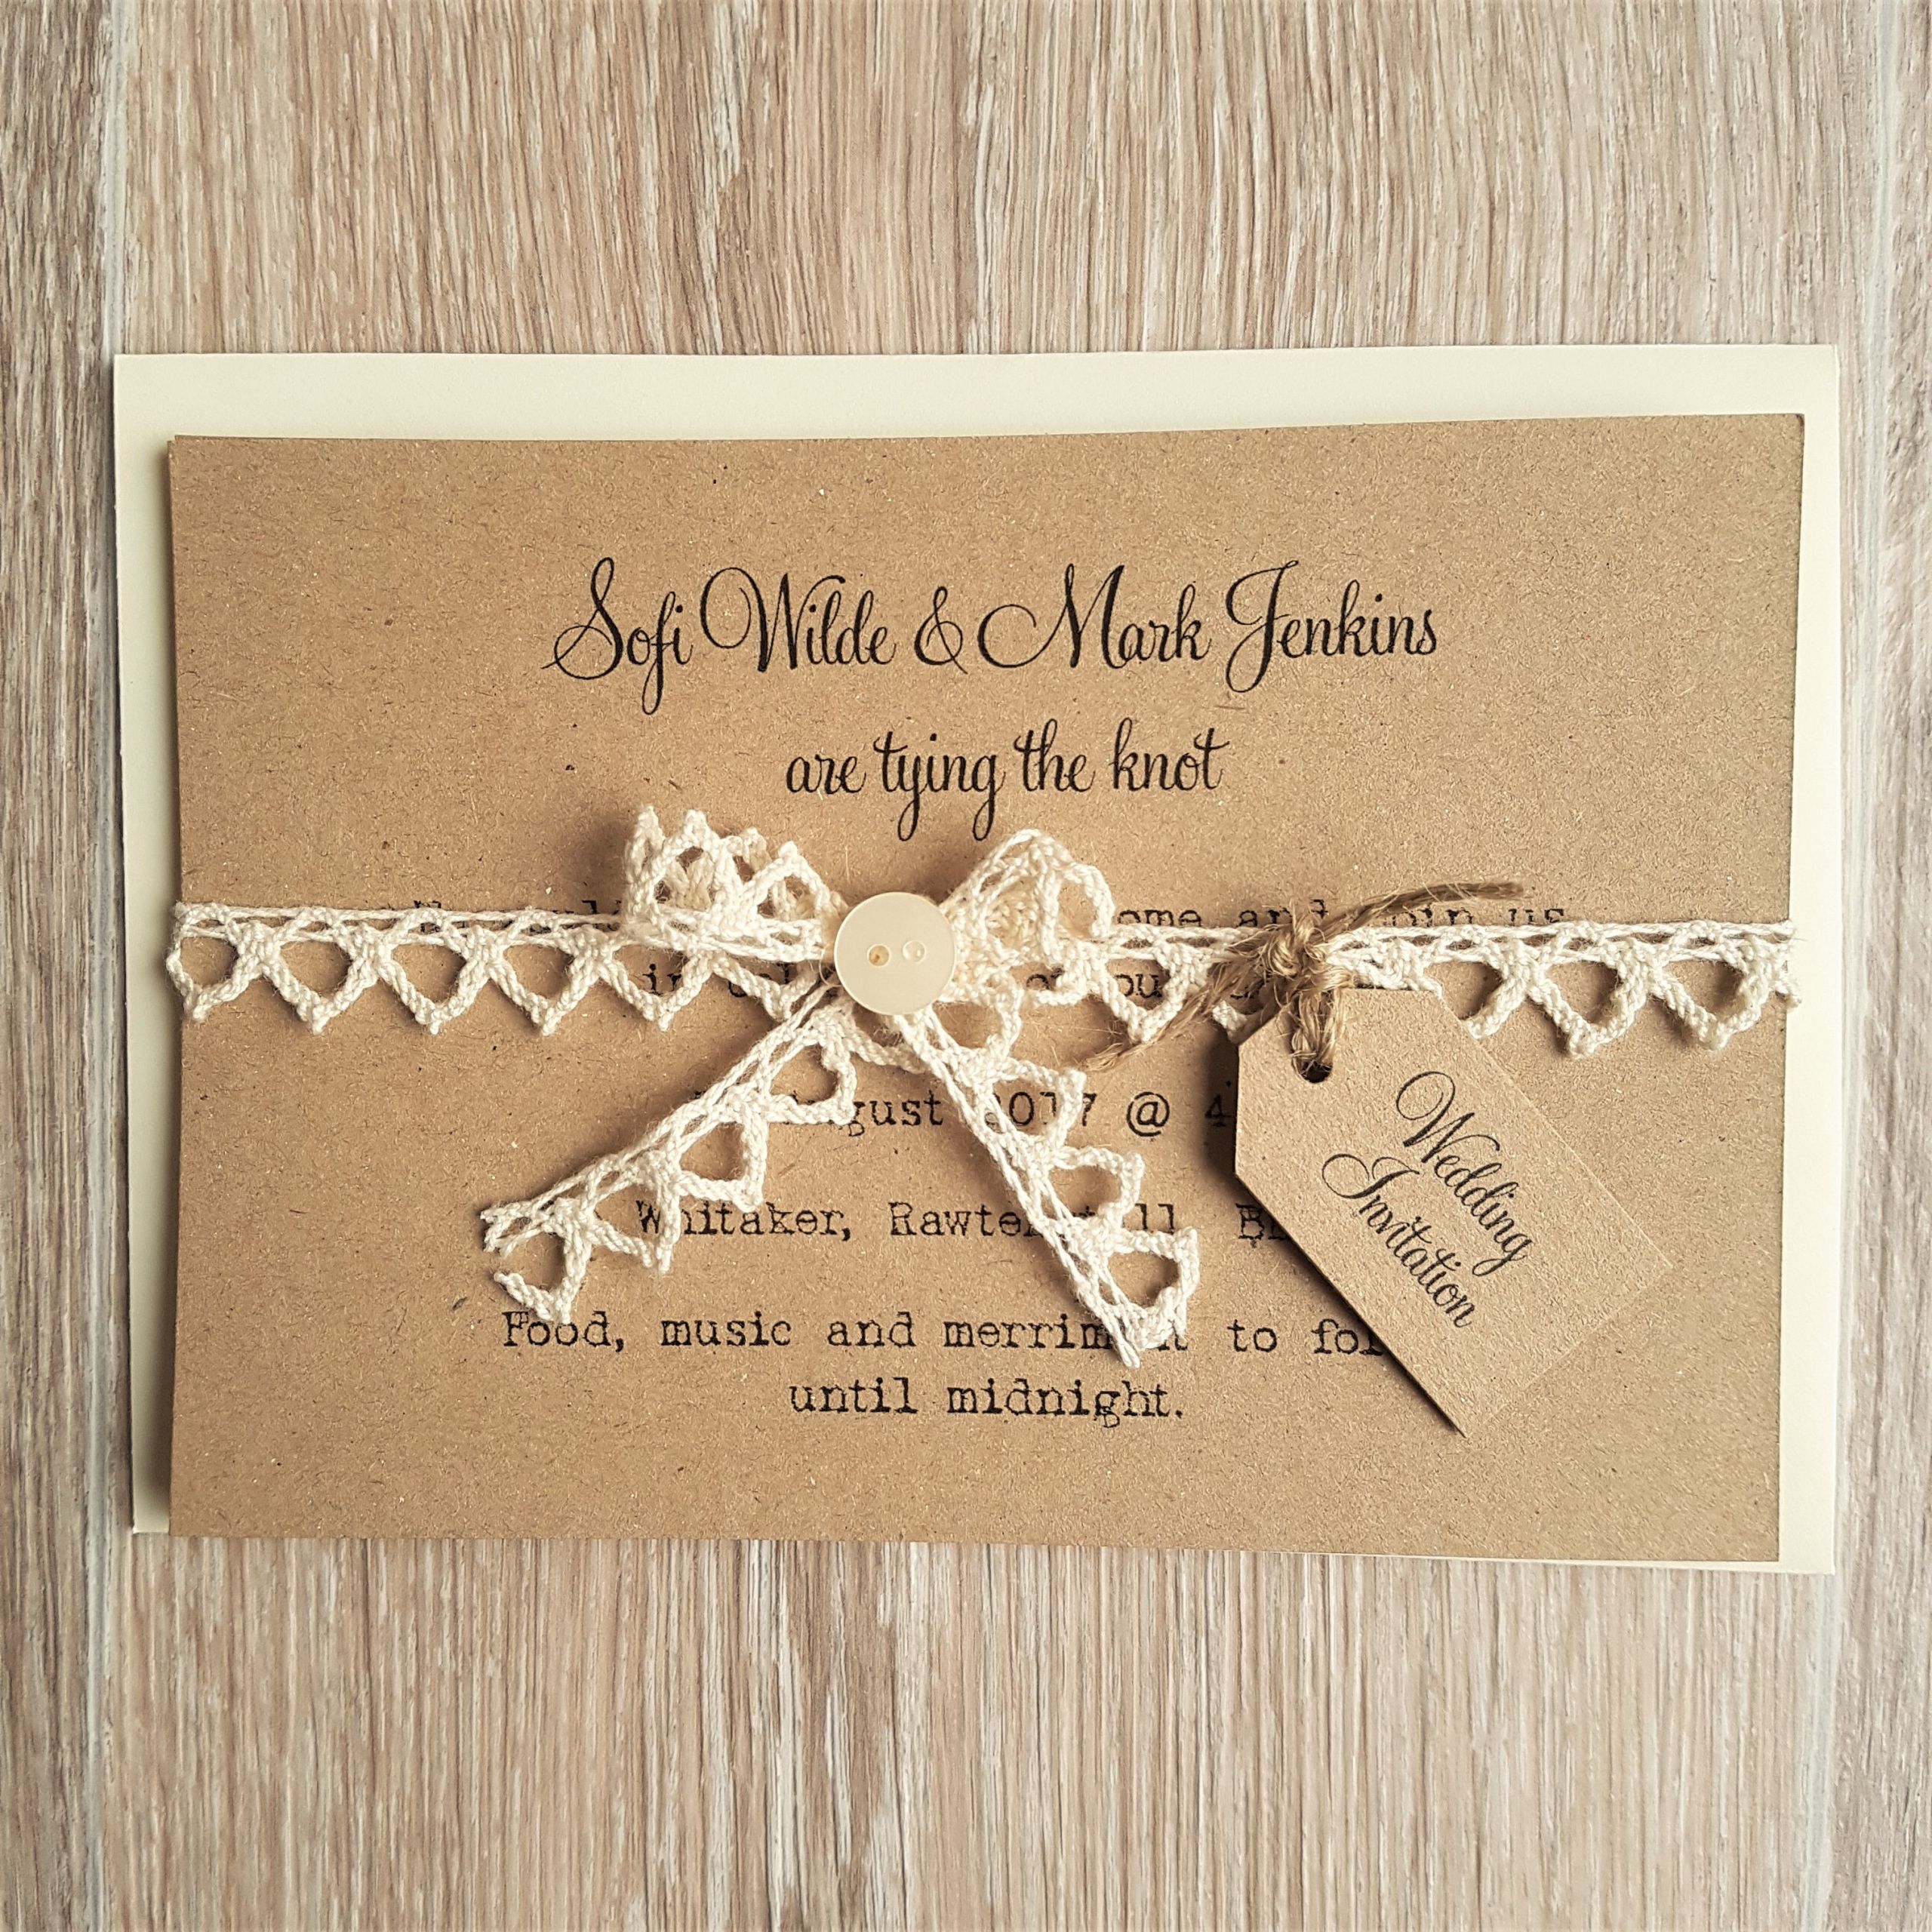 Wedding Invitations Vintage
 Rustic Vintage Lace and Button Wedding Invitations